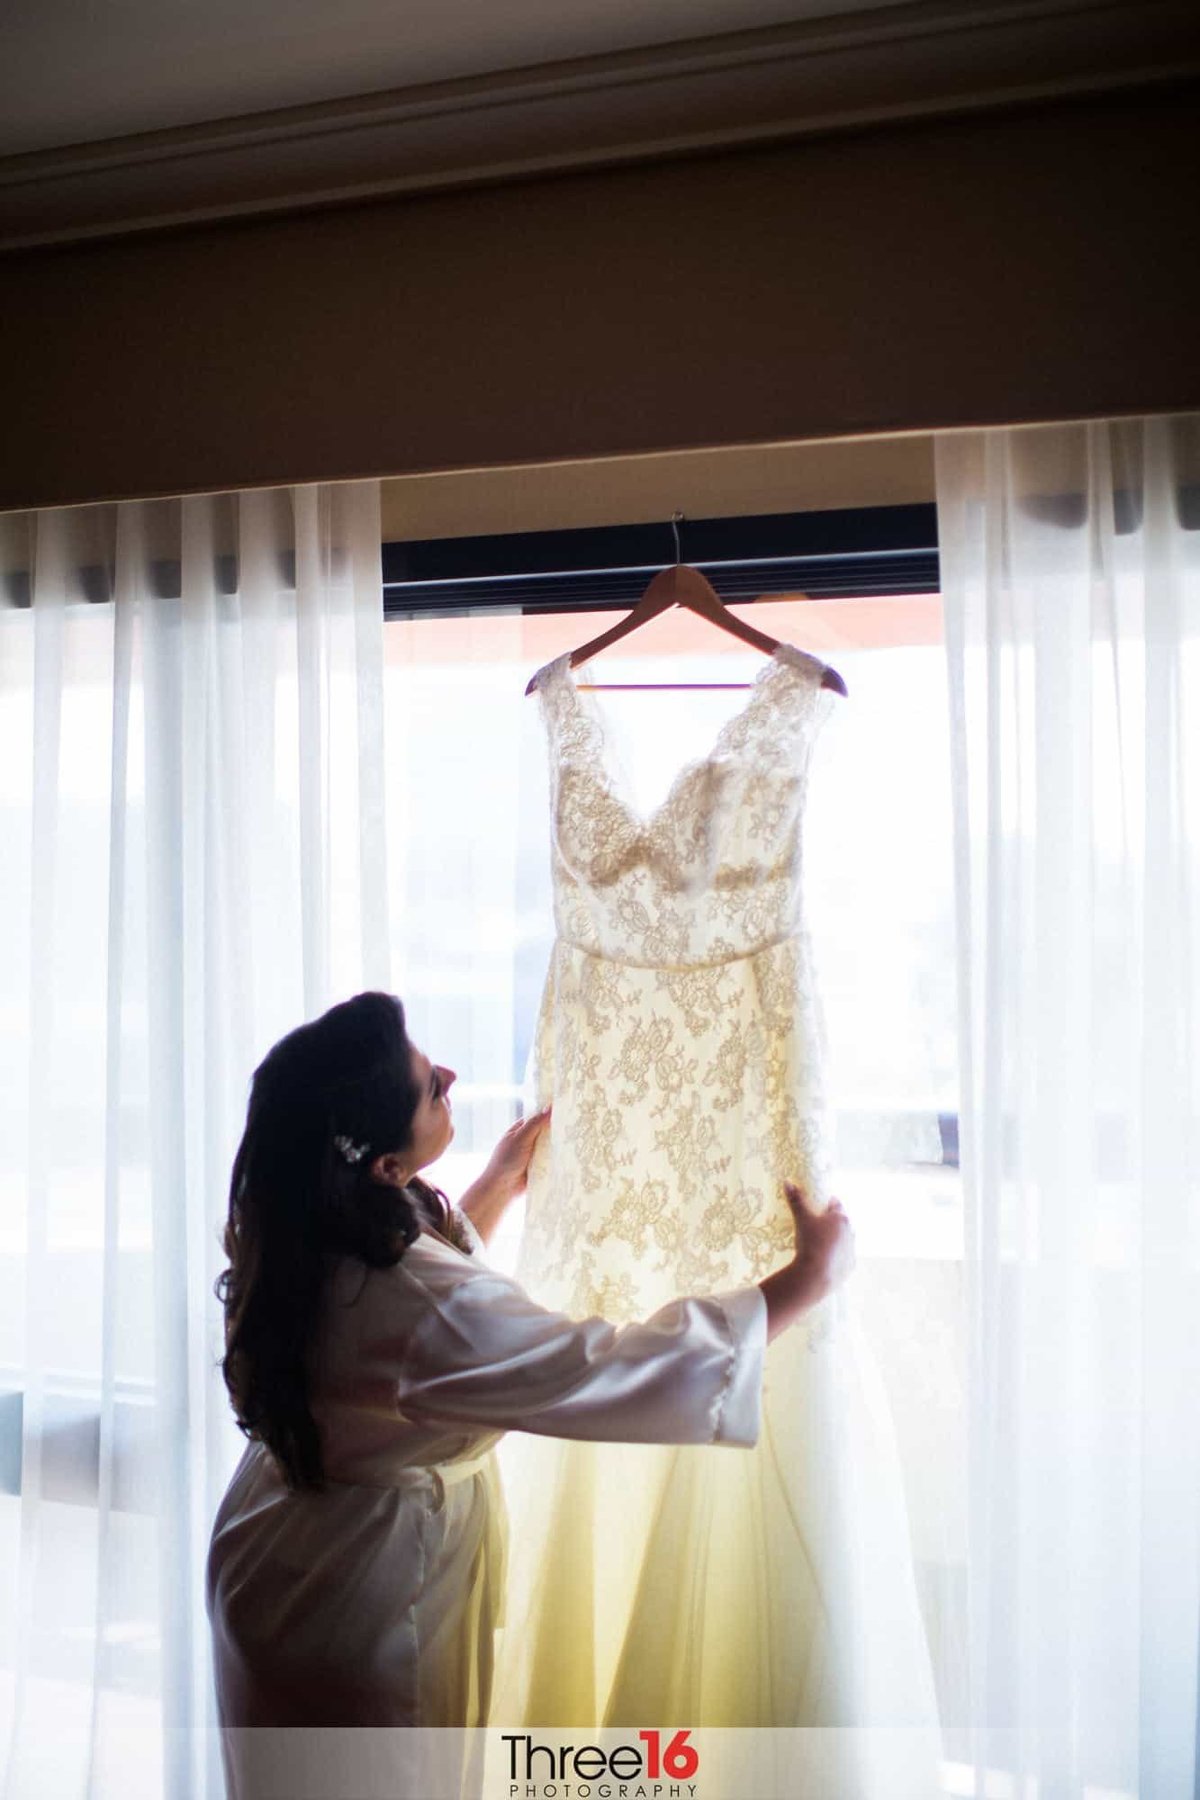 Bride looks at her dress as it hangs on the rod